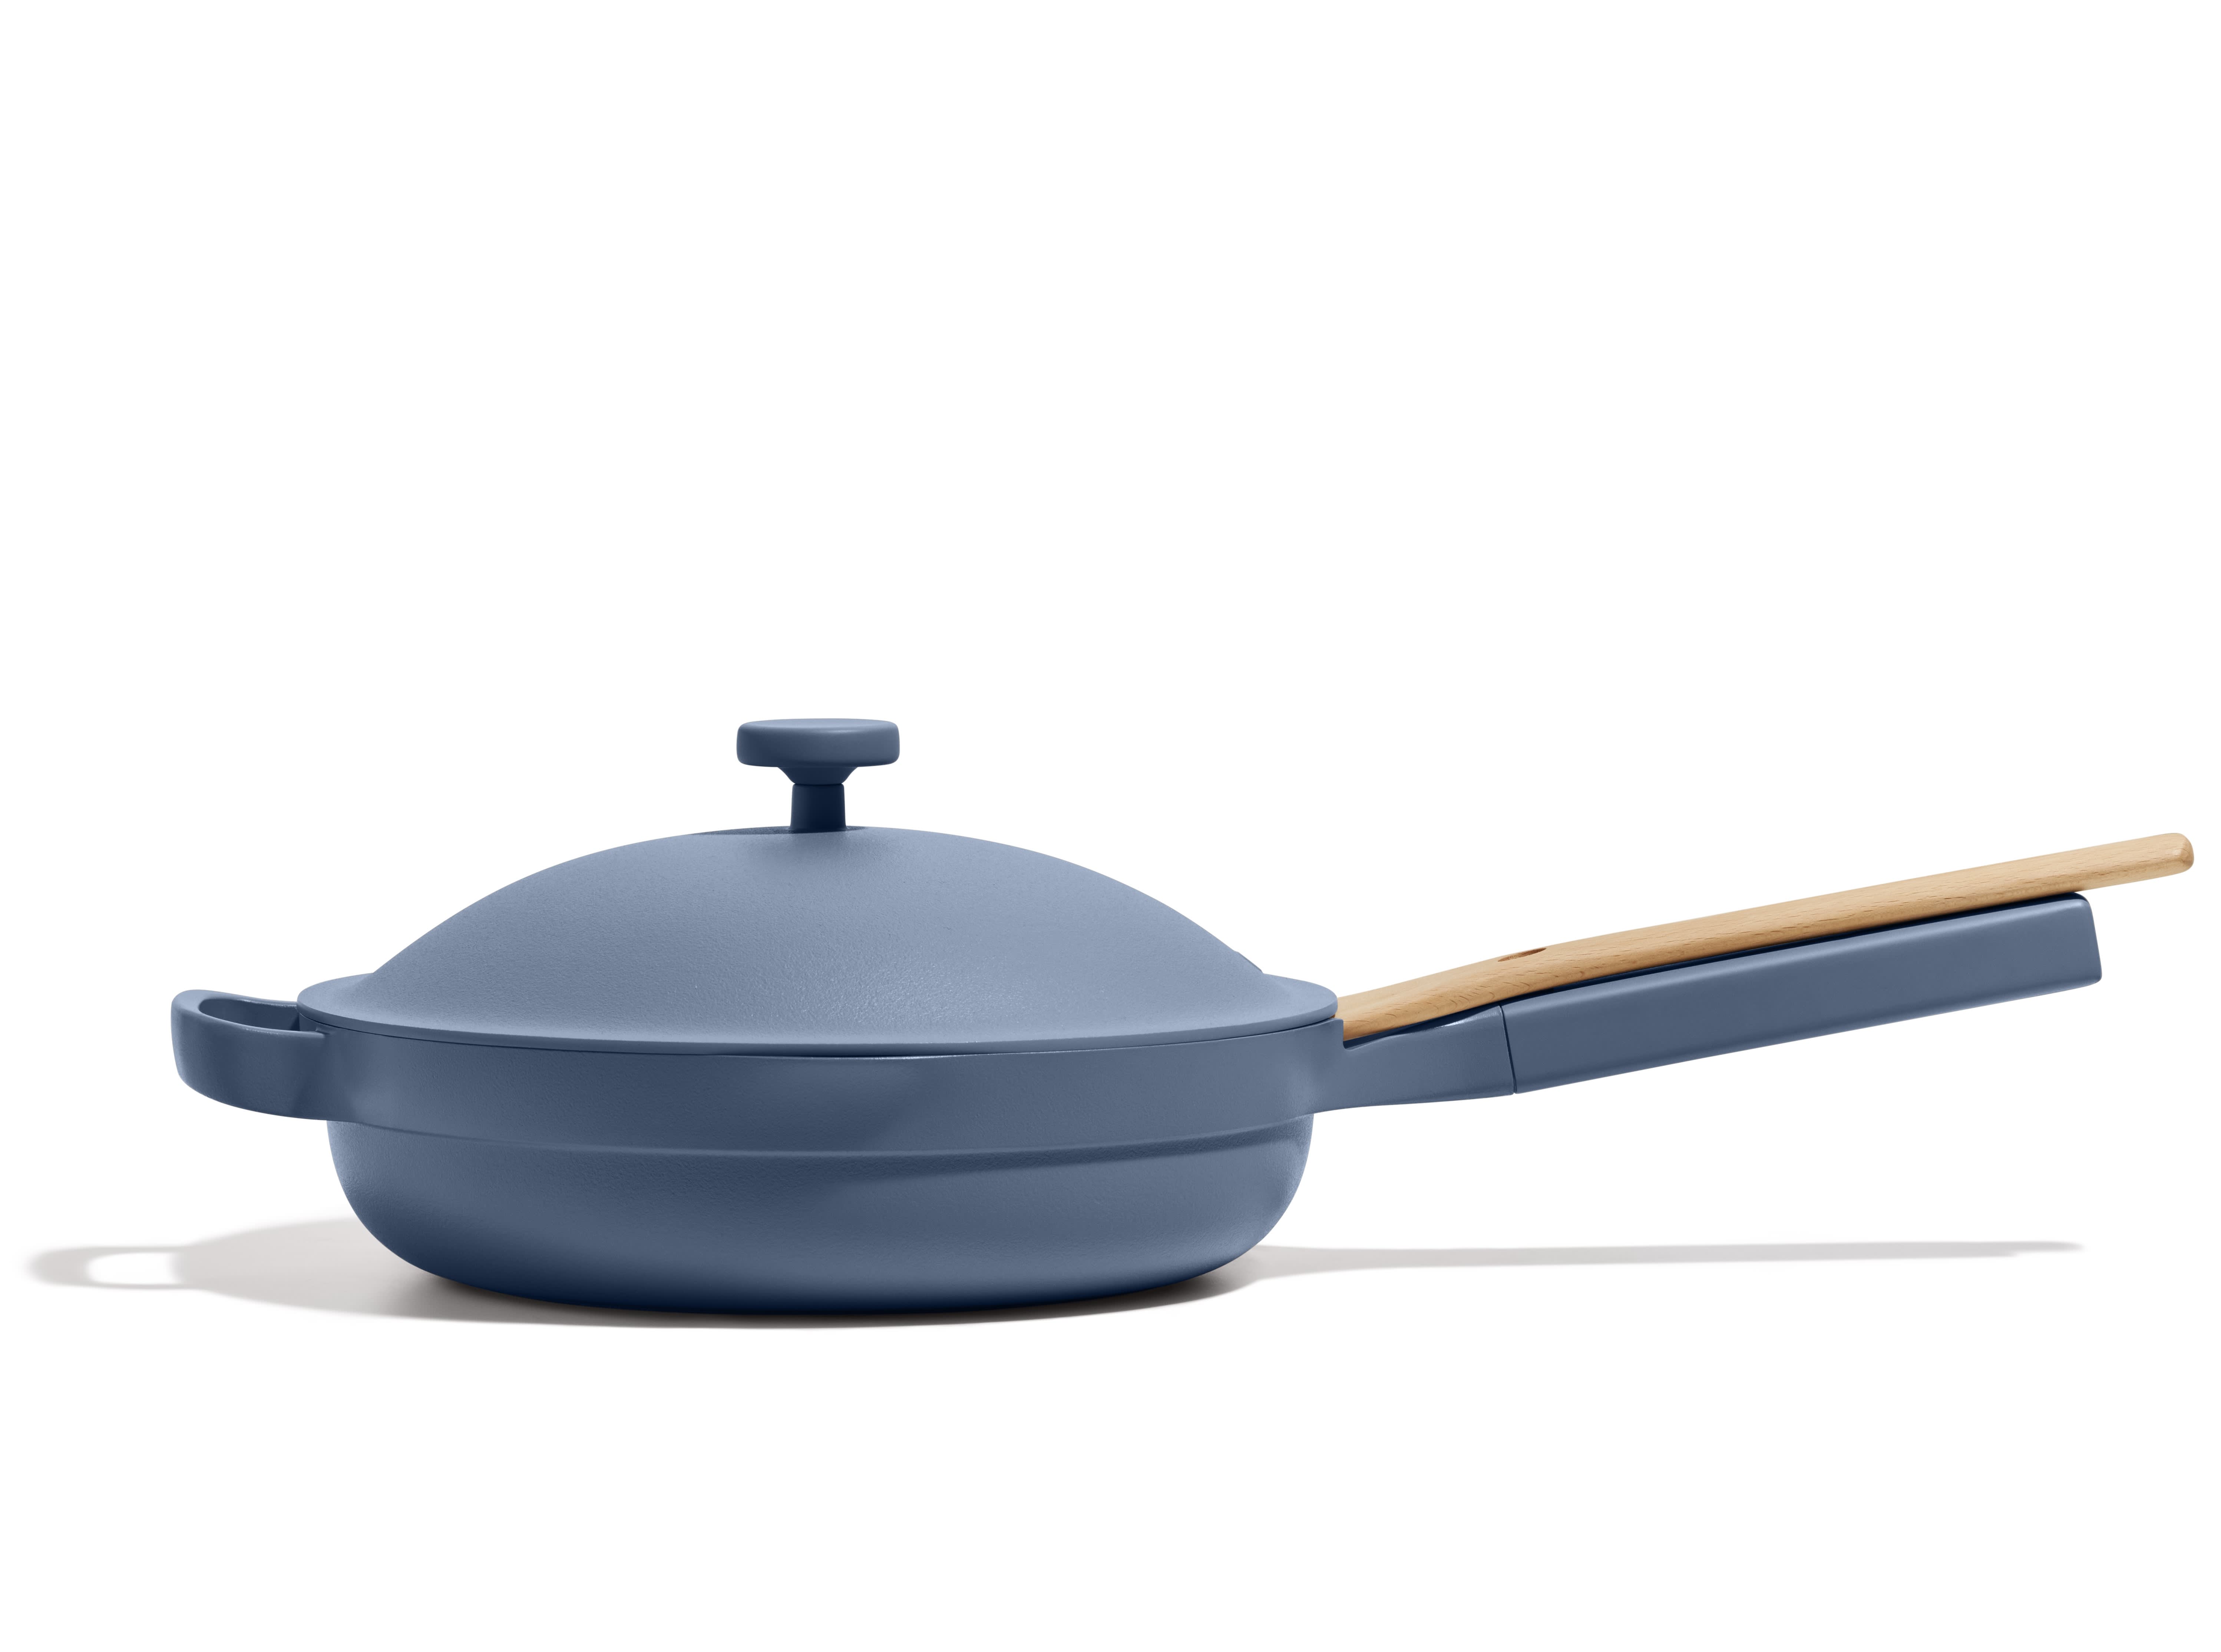 New Cookware 3 Month Review